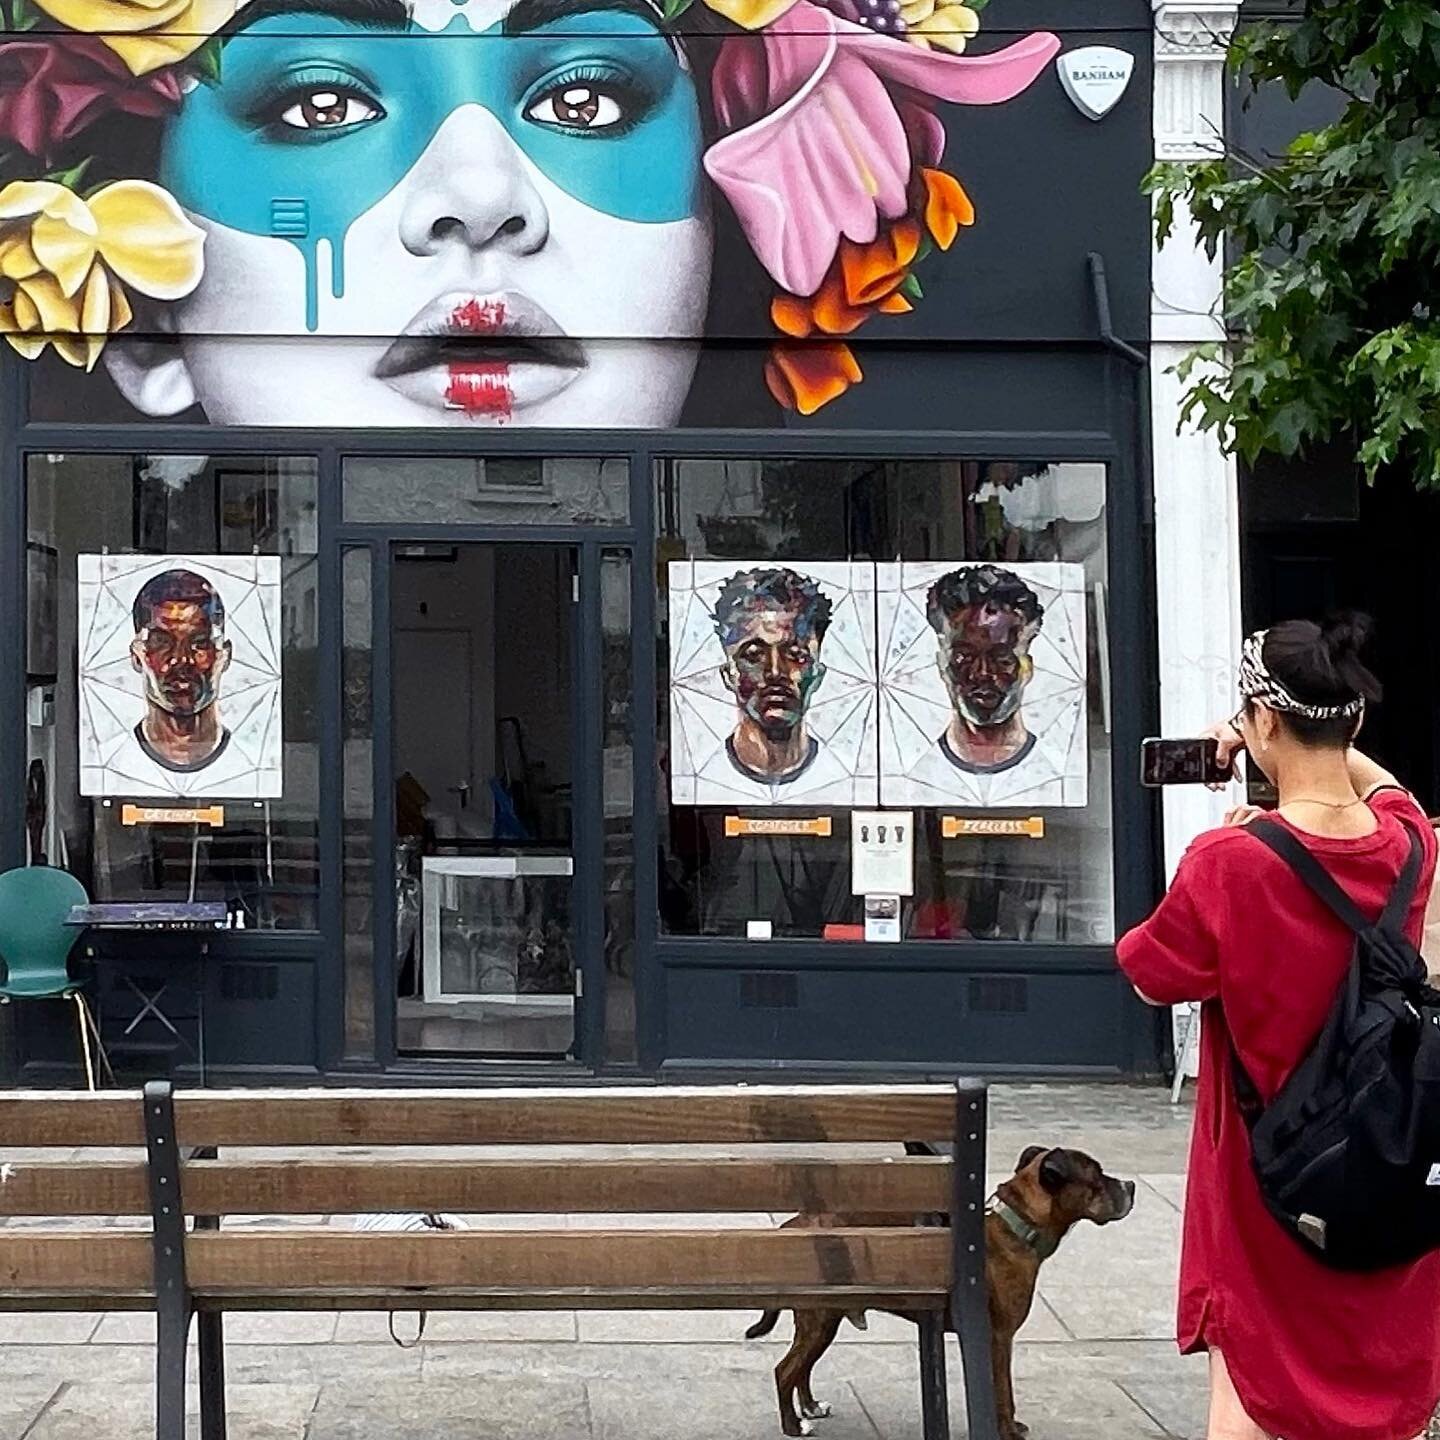 Tonight Thursday 22nd July, 6-9pm @jgcontemporary will be hosting an evening with BP Portrait Award Nominee Matt Small. 

The three paintings in the window of Marcus Rashford, Jadon Sancho and Bukayo Saka are from a collection of 23 portraits of the 